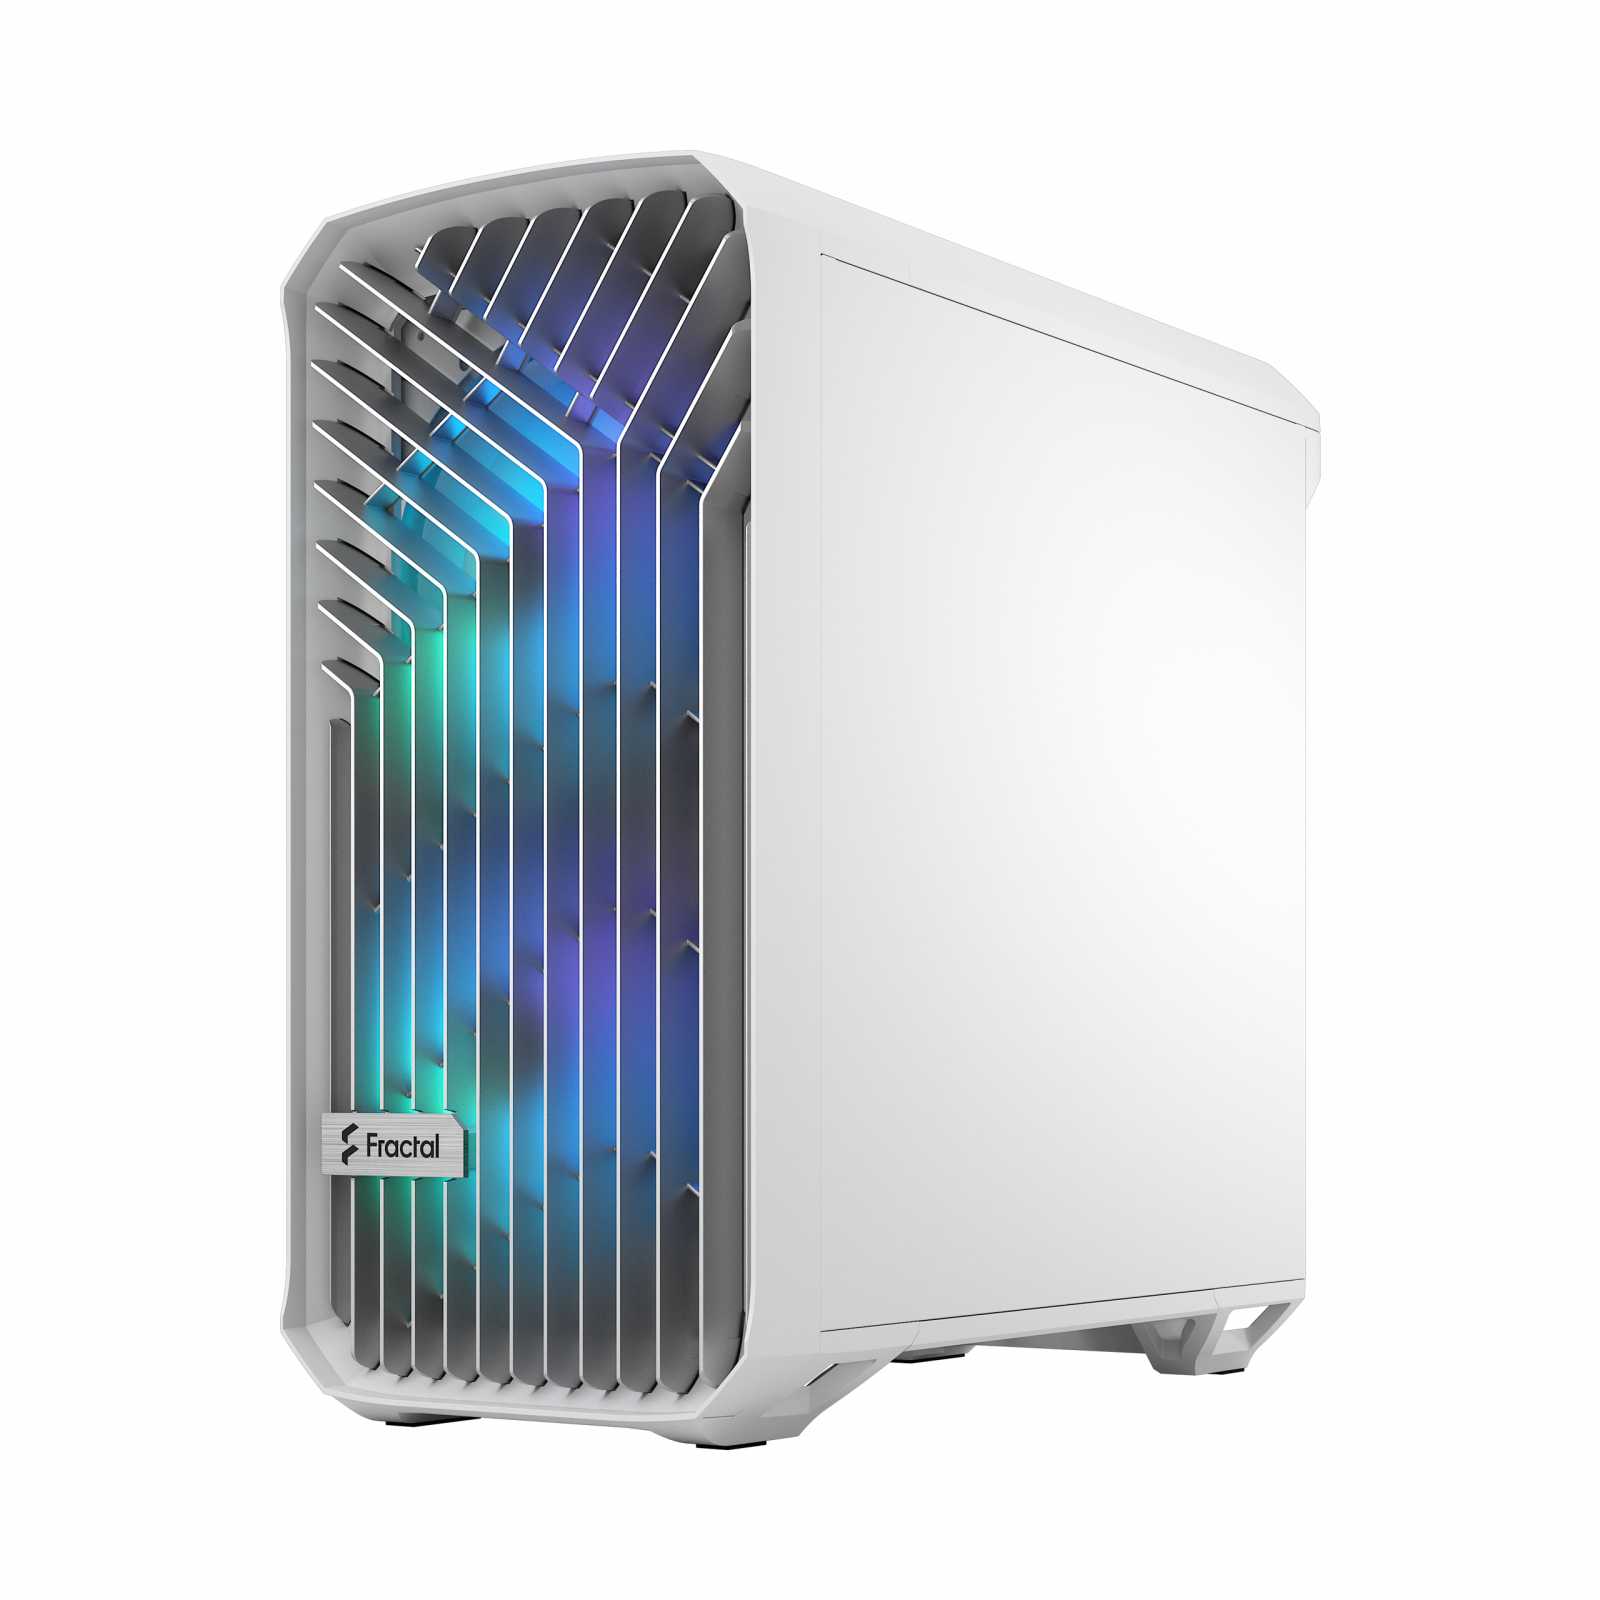 Torrent_Compact_White_RGB_TGC_7 Right Front.jpg